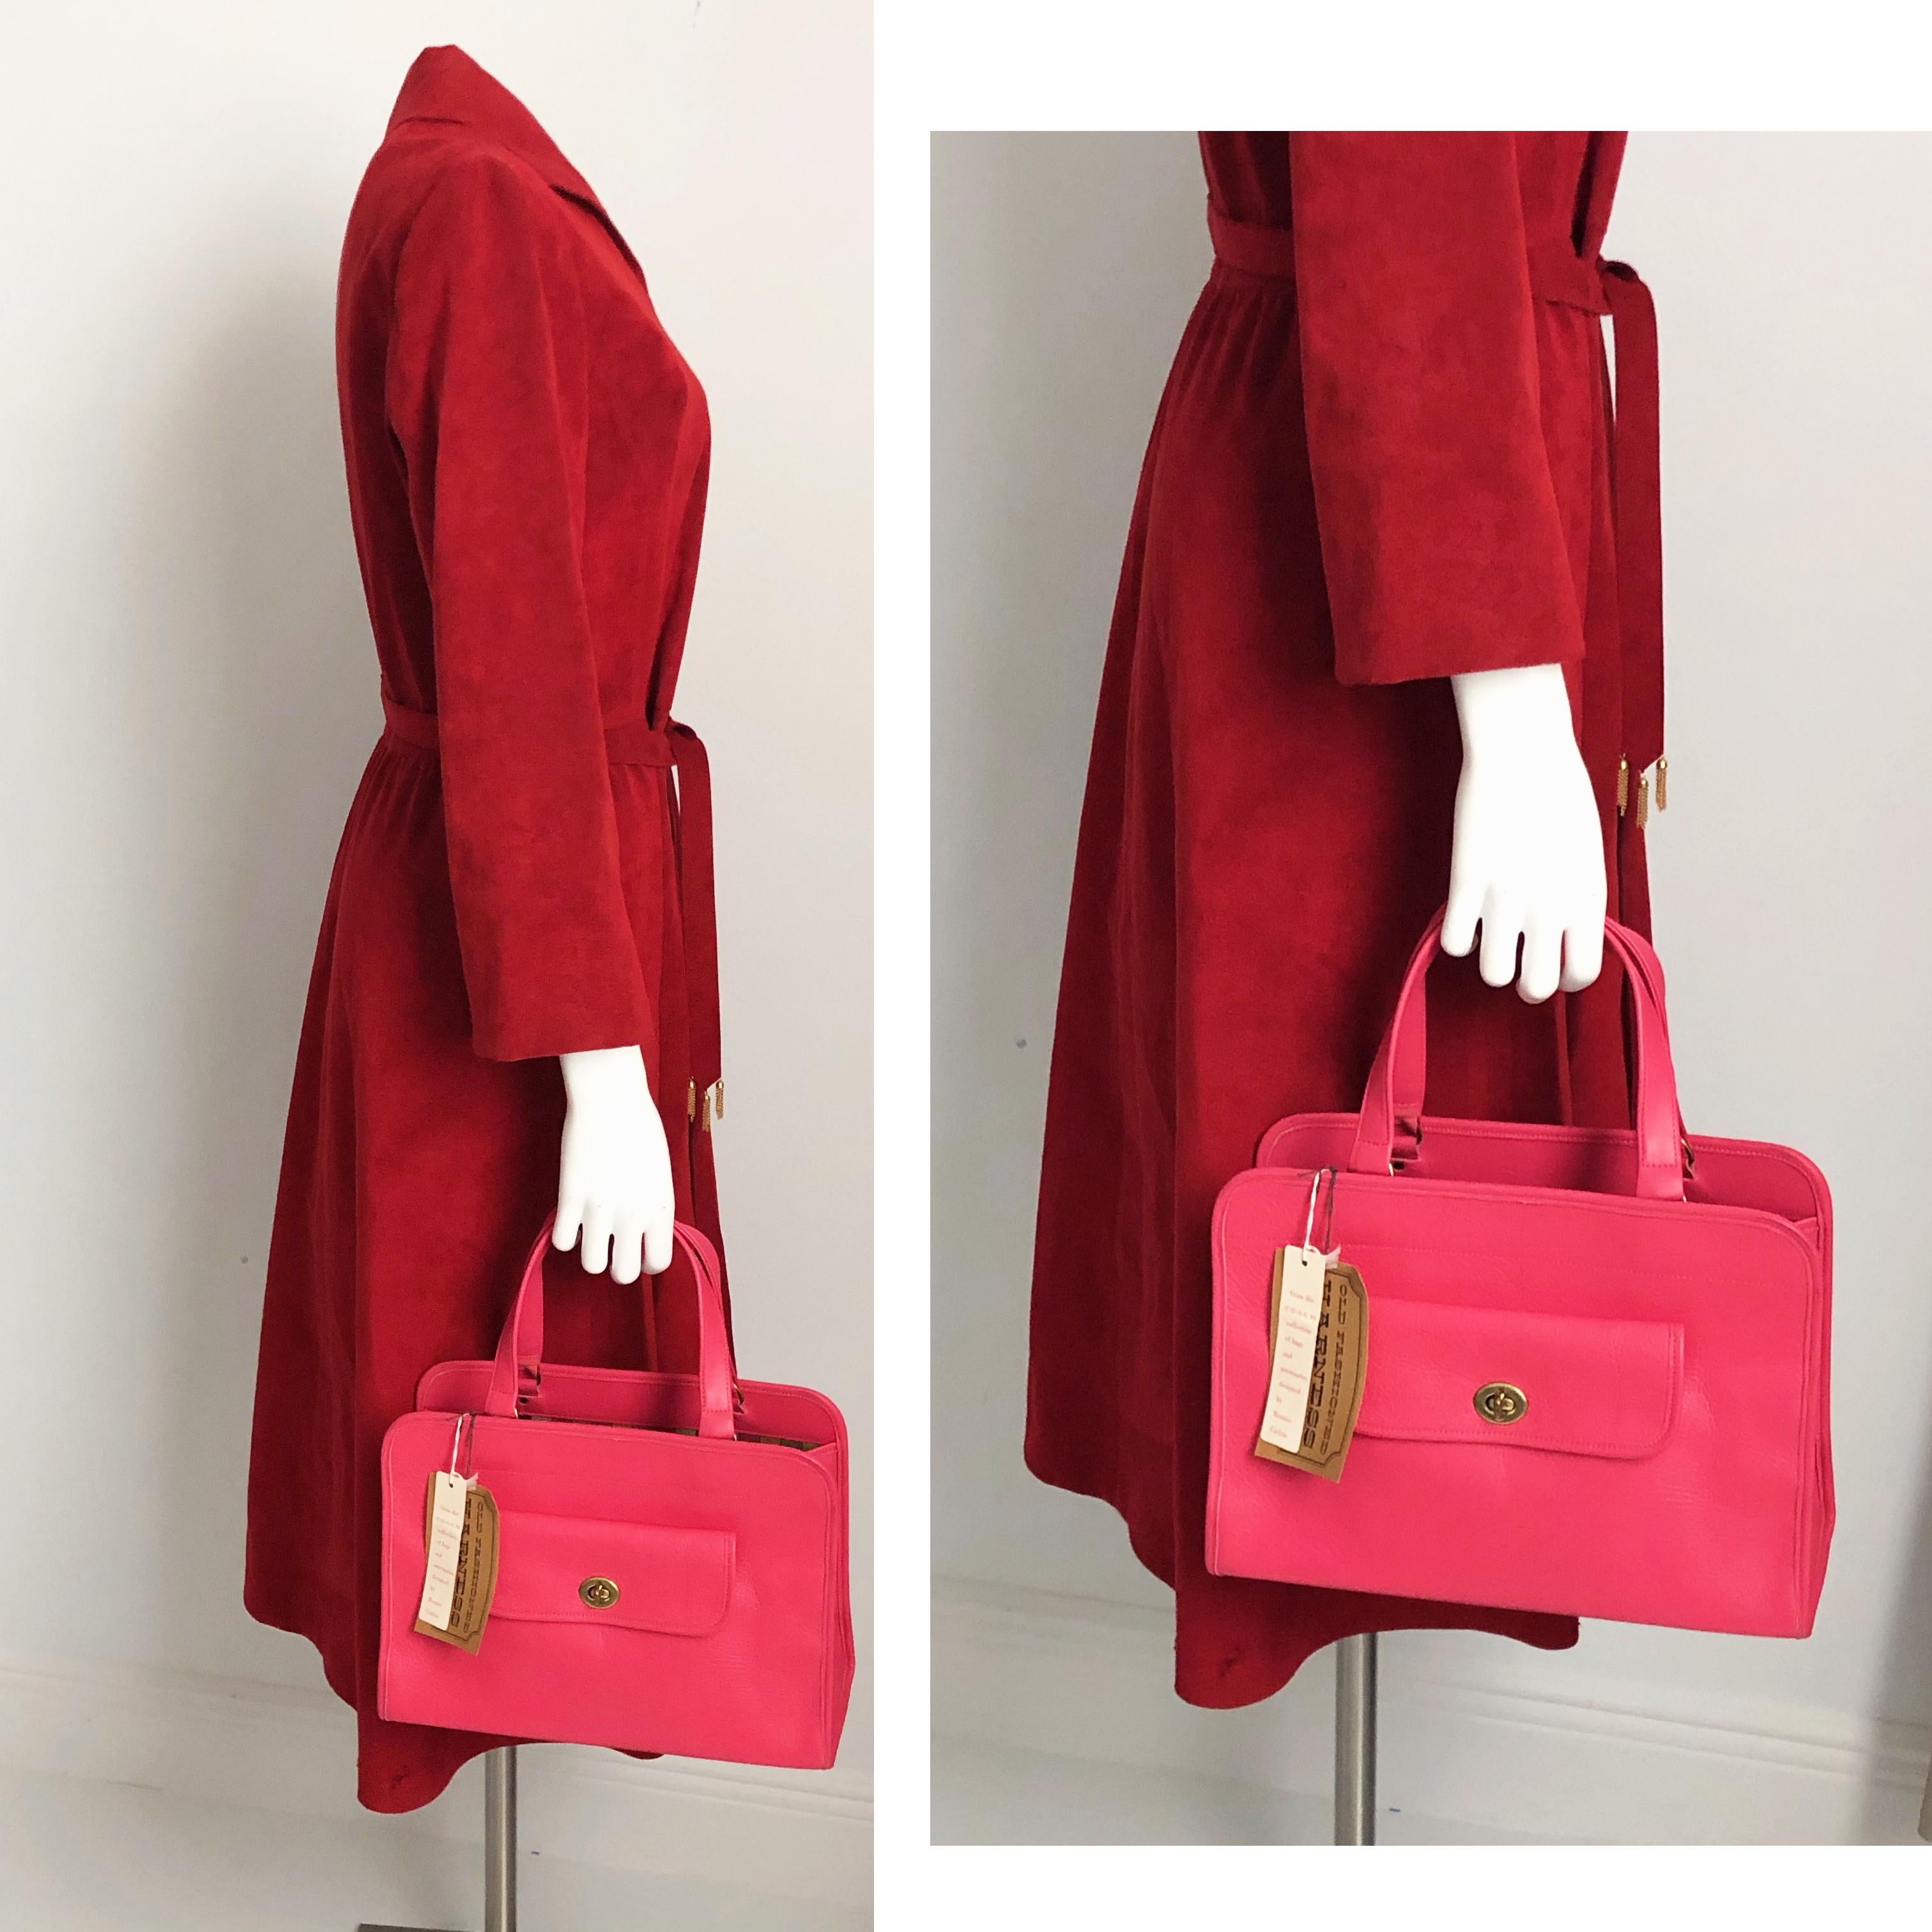 Authentic, vintage RARE Bonnie Cashin Coach Safari Tote Bag in what we believe is Geranium leather (a red toned pink, see pic 11 chart). A UNICORN! From the 60s, with one turn lock slip pocket & interior lined in Bonnie's signature striped fabric